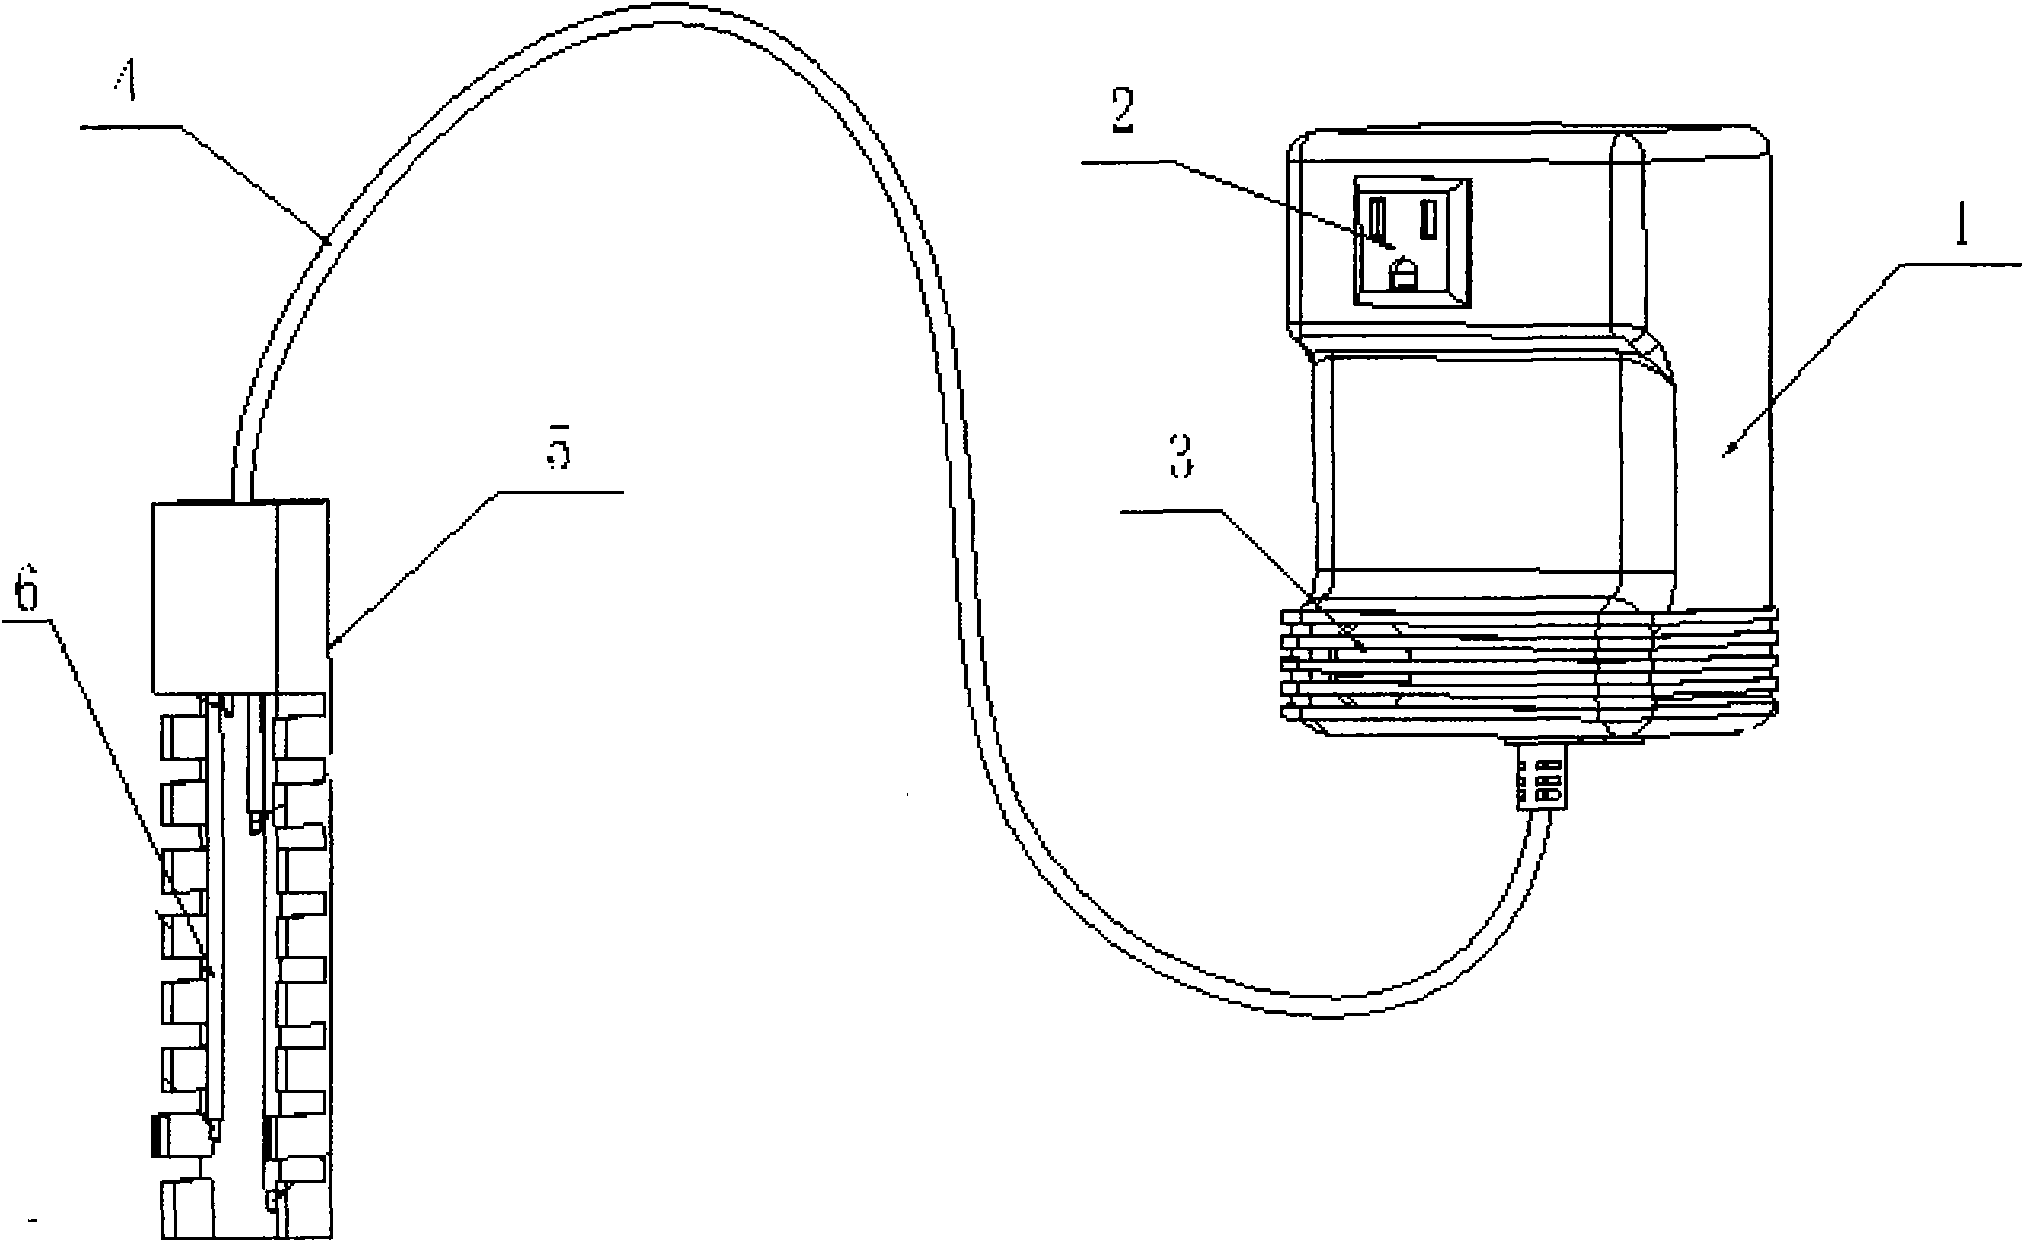 Split structure of probe and switch box